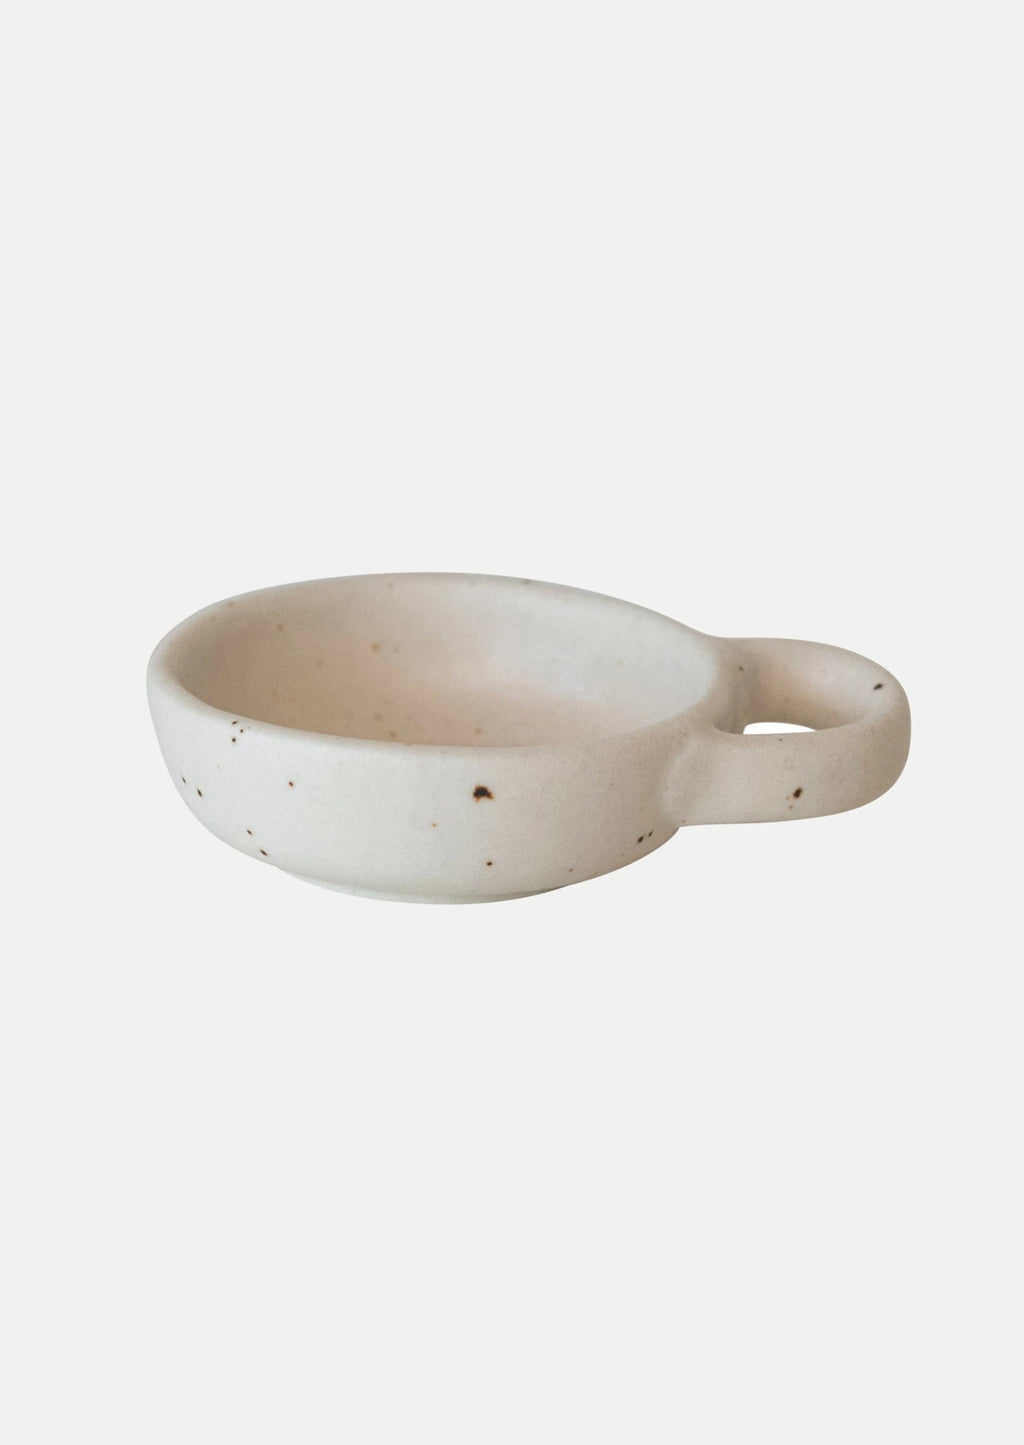 2: A small ceramic pinch bowl in speckled white ceramic with decorative handle.